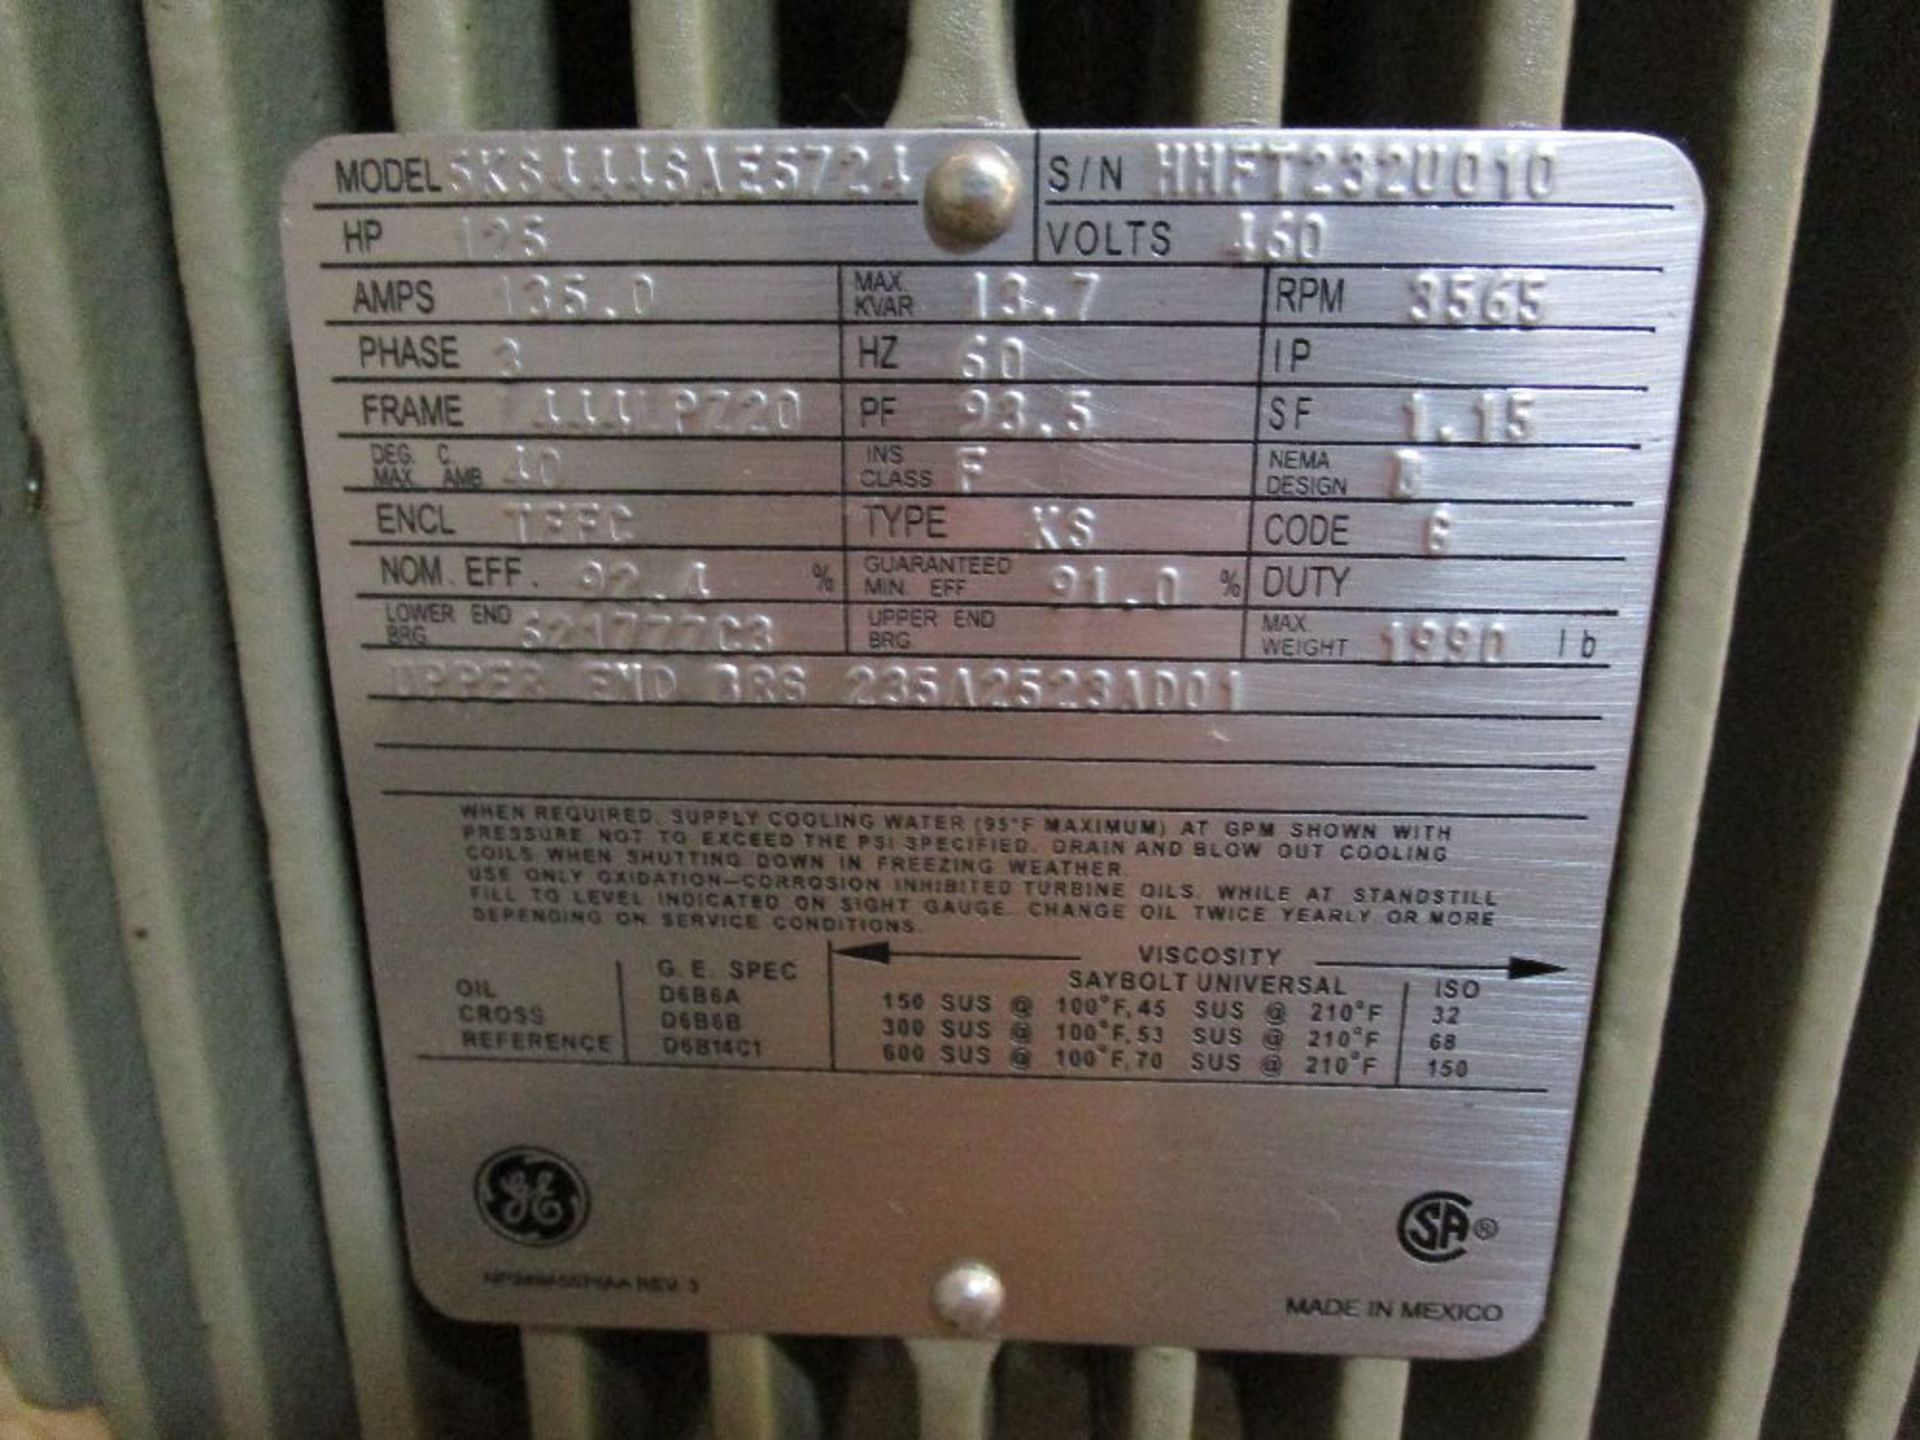 General Electric Model SKS444SAE5724 125 HP Electric Induction Motor - Image 4 of 4